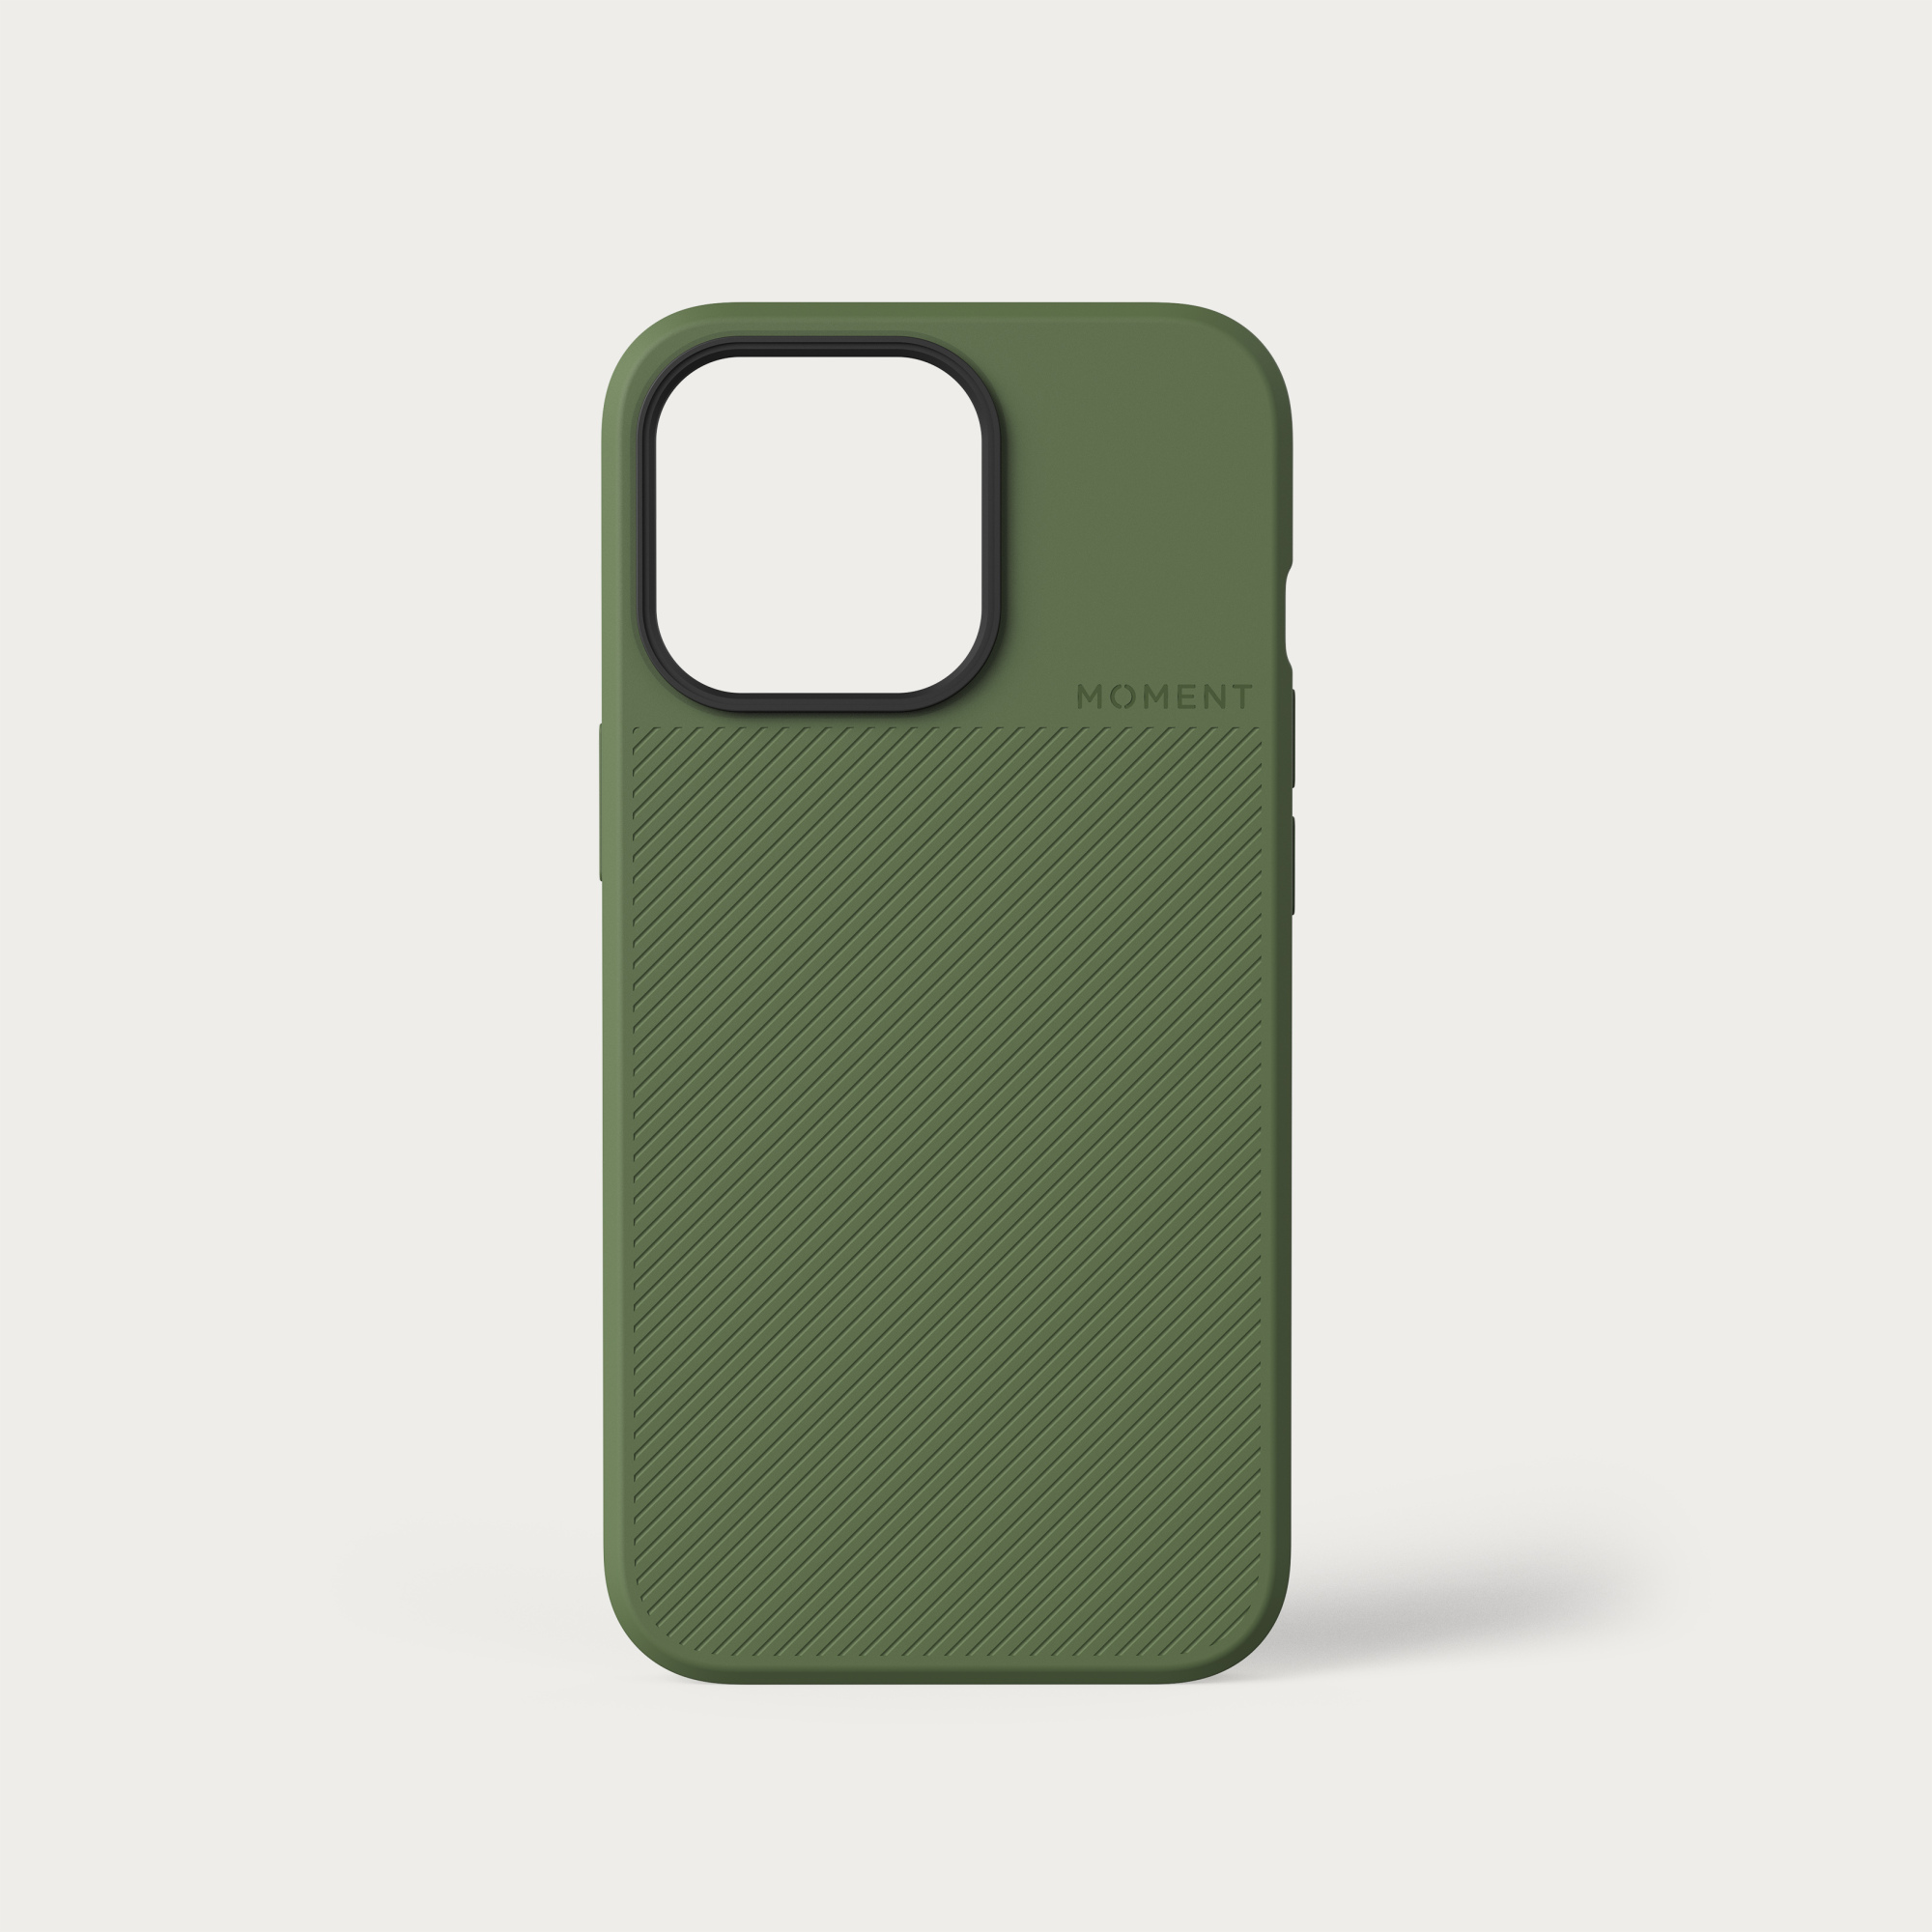 This olive color is simply swoon-worthy.